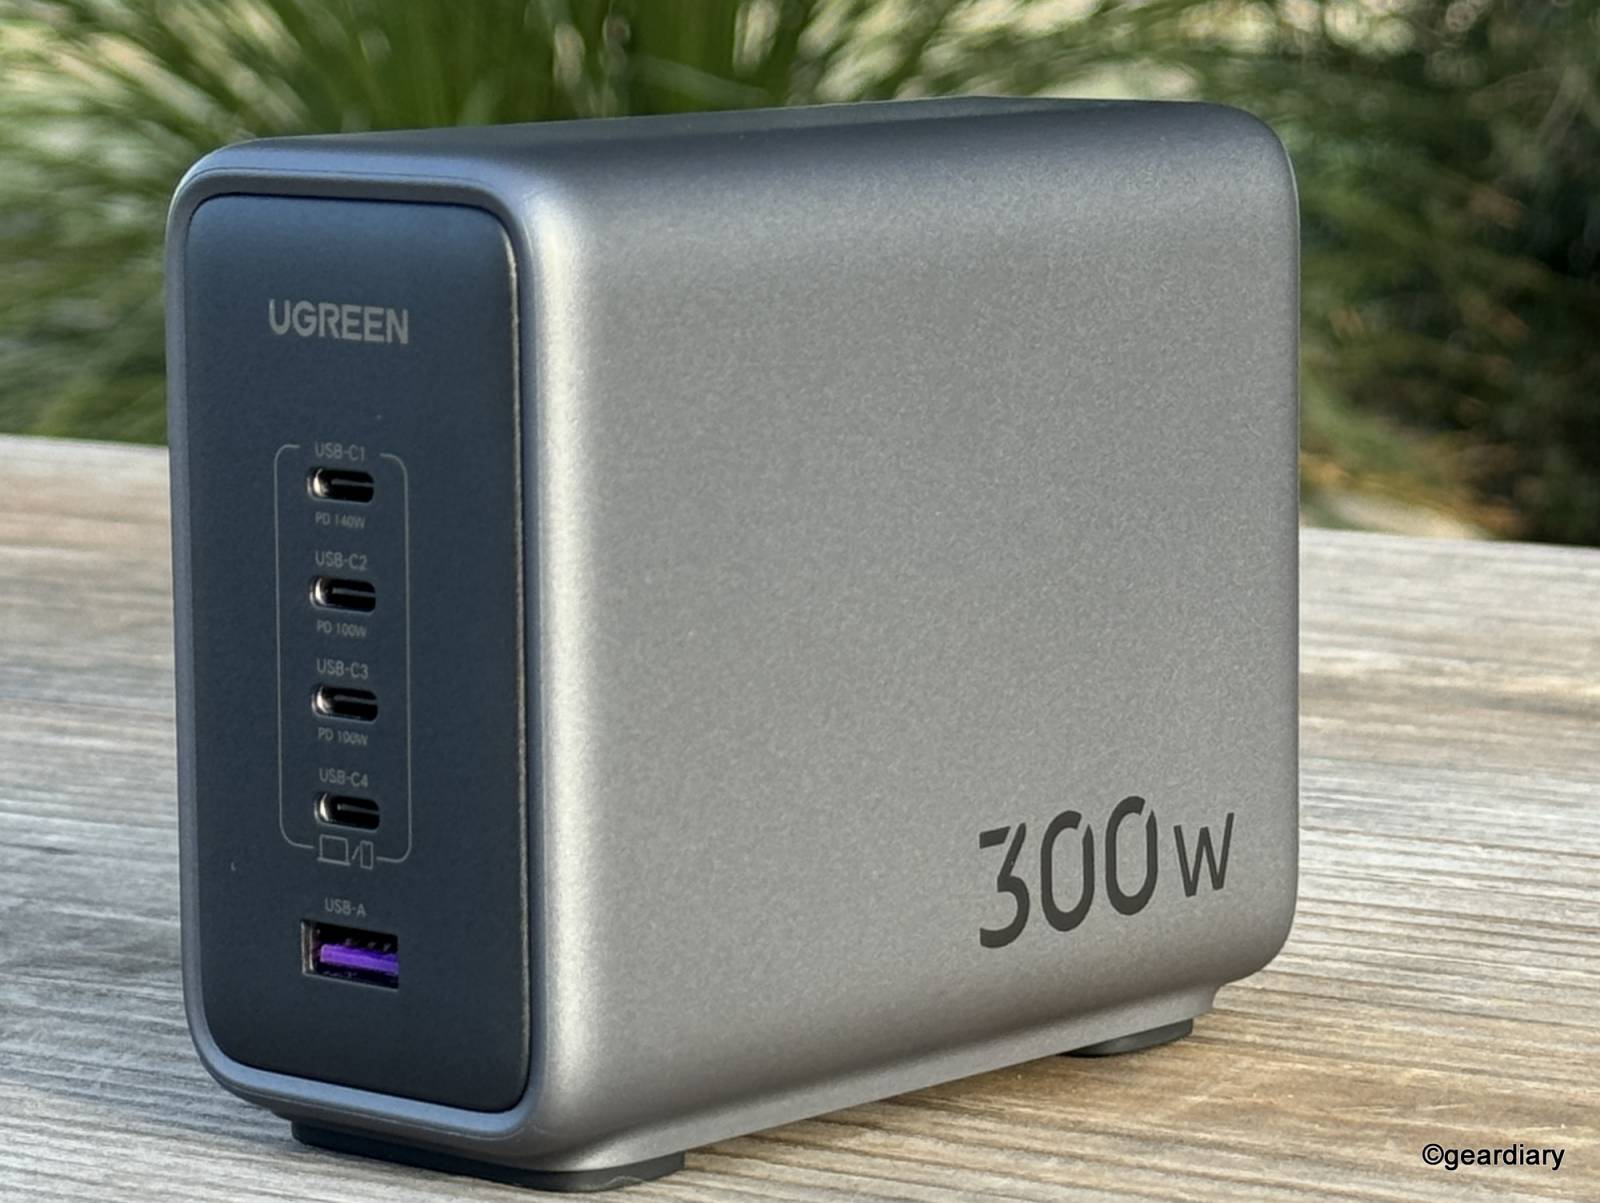 Ugreen Nexode 300W USB-C GaN Desktop Charger Review: So Powerful It Can Charge up to Three Laptops at Once!